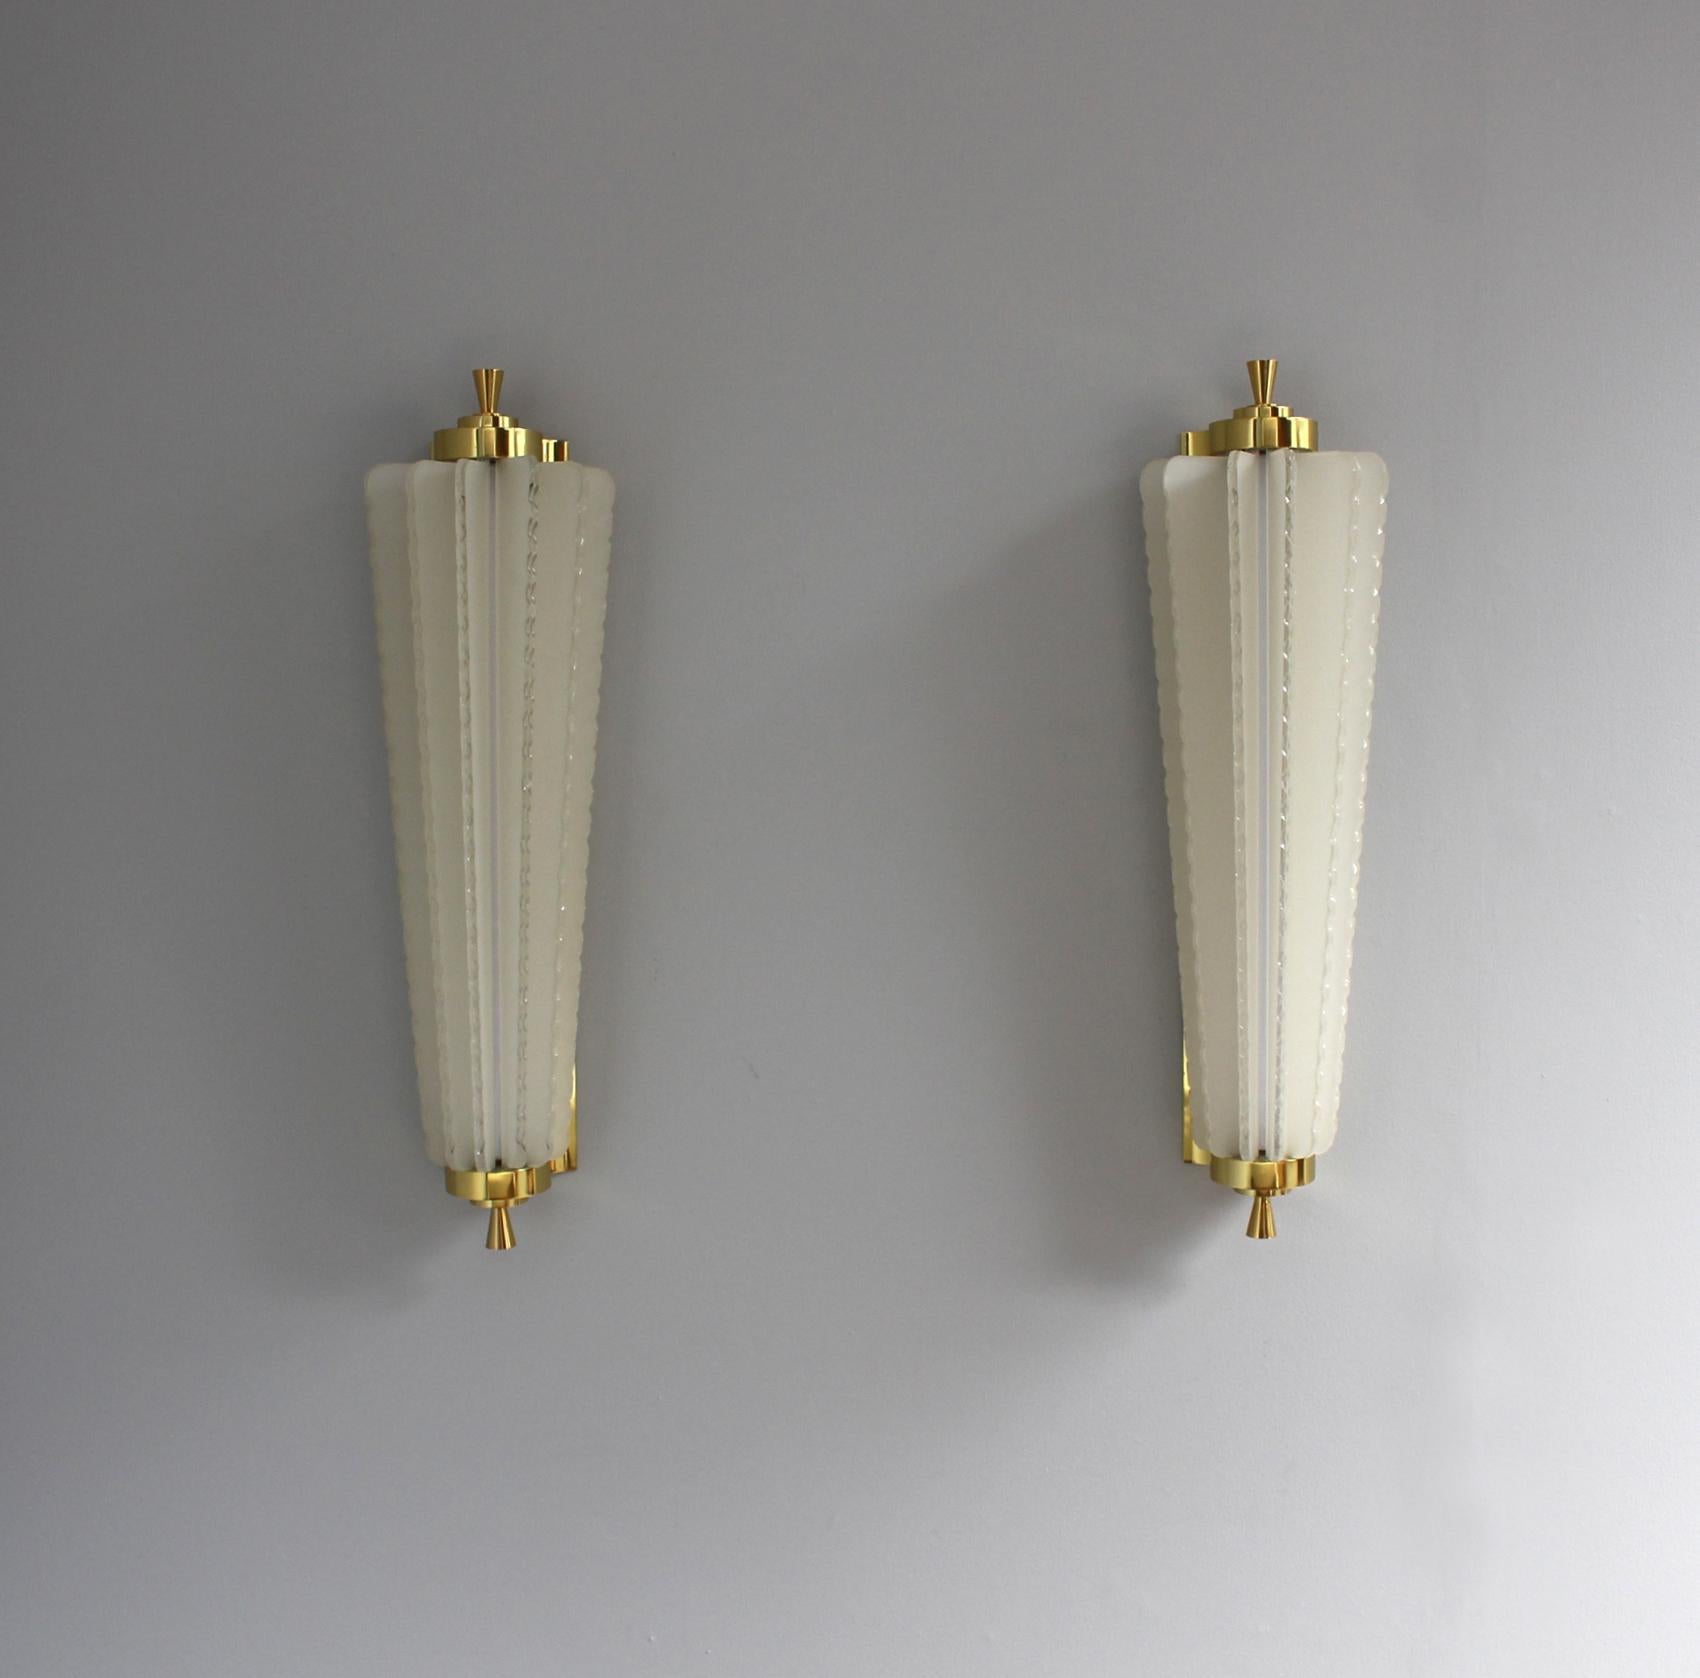 A pair of fine French 1930s wall lights with hand-cut frosted glass strips mounted in a bronze frame.